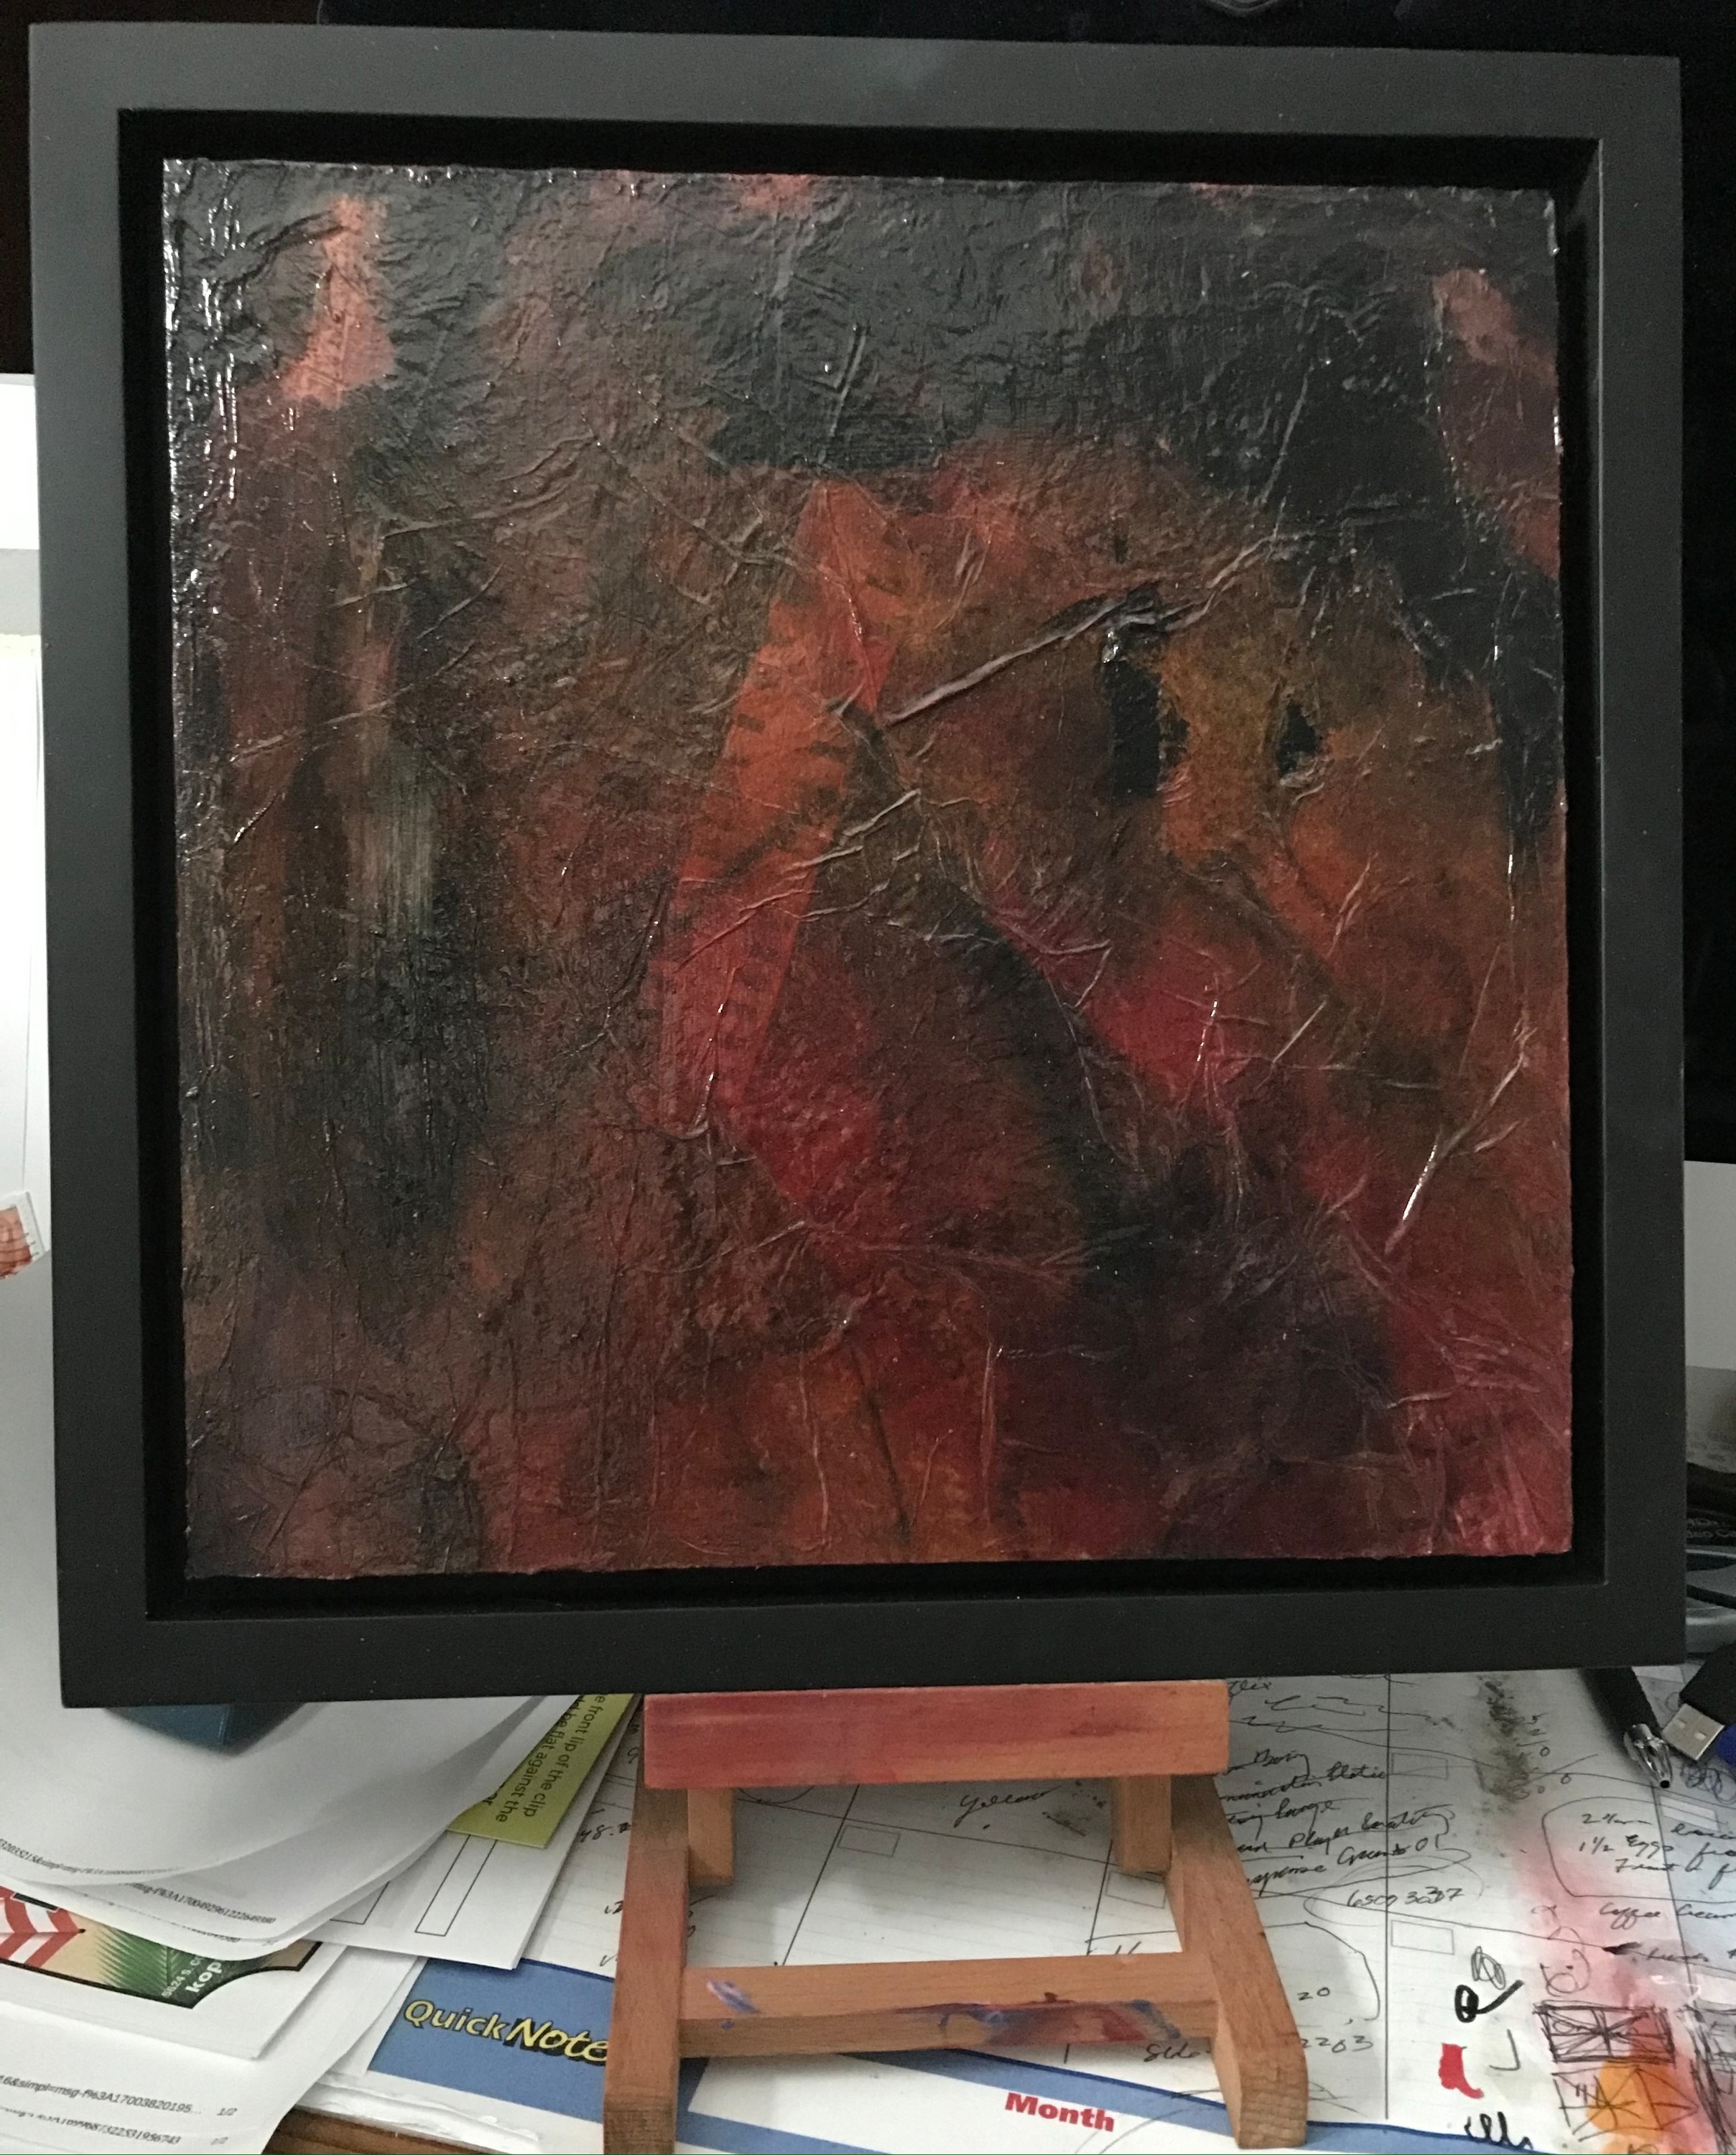 Square foot 16 framed on easel g0kxaq